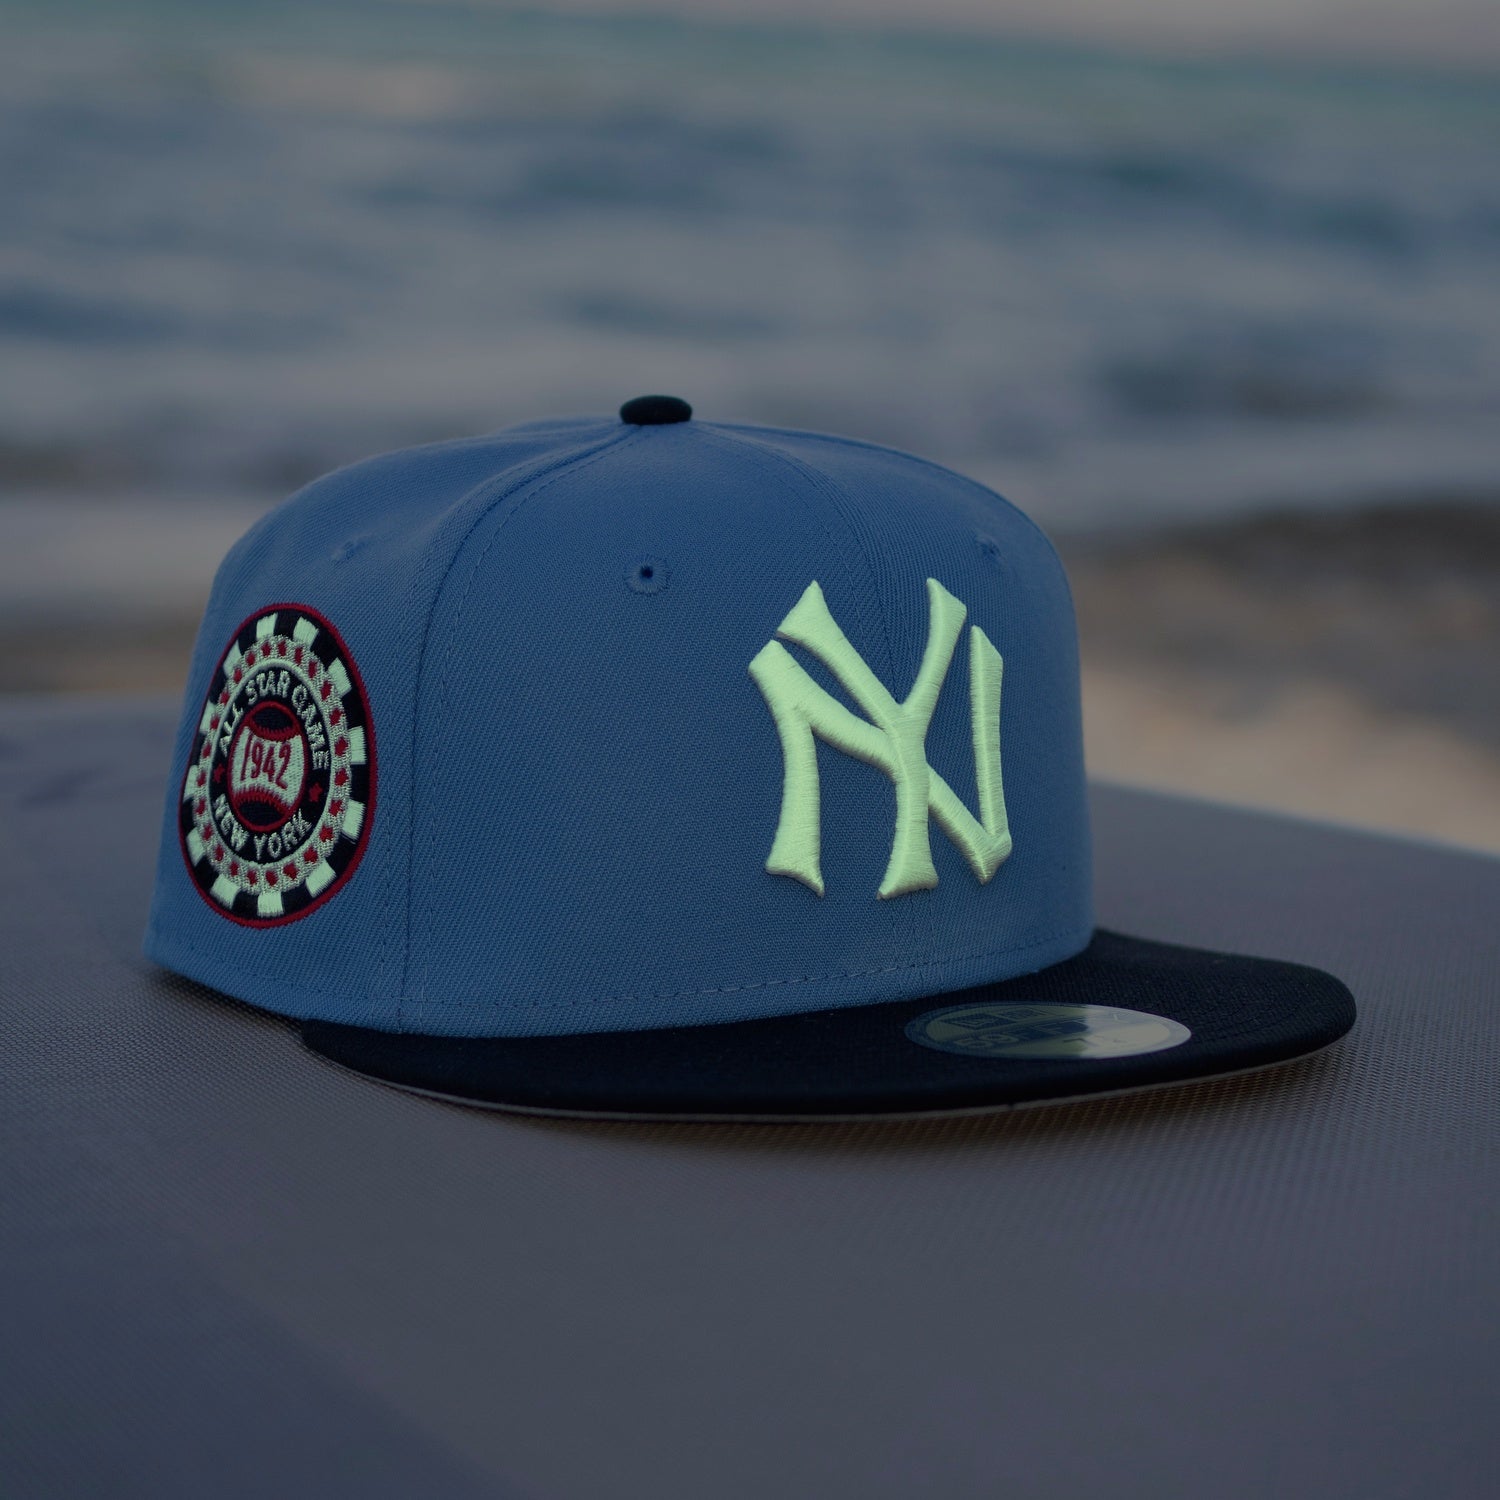 NEW ERA 59FIFTY MLB NEW YORK YANKEES ALL STAR GAME 1942 TWO TONE / GREY UV FITTED CAP